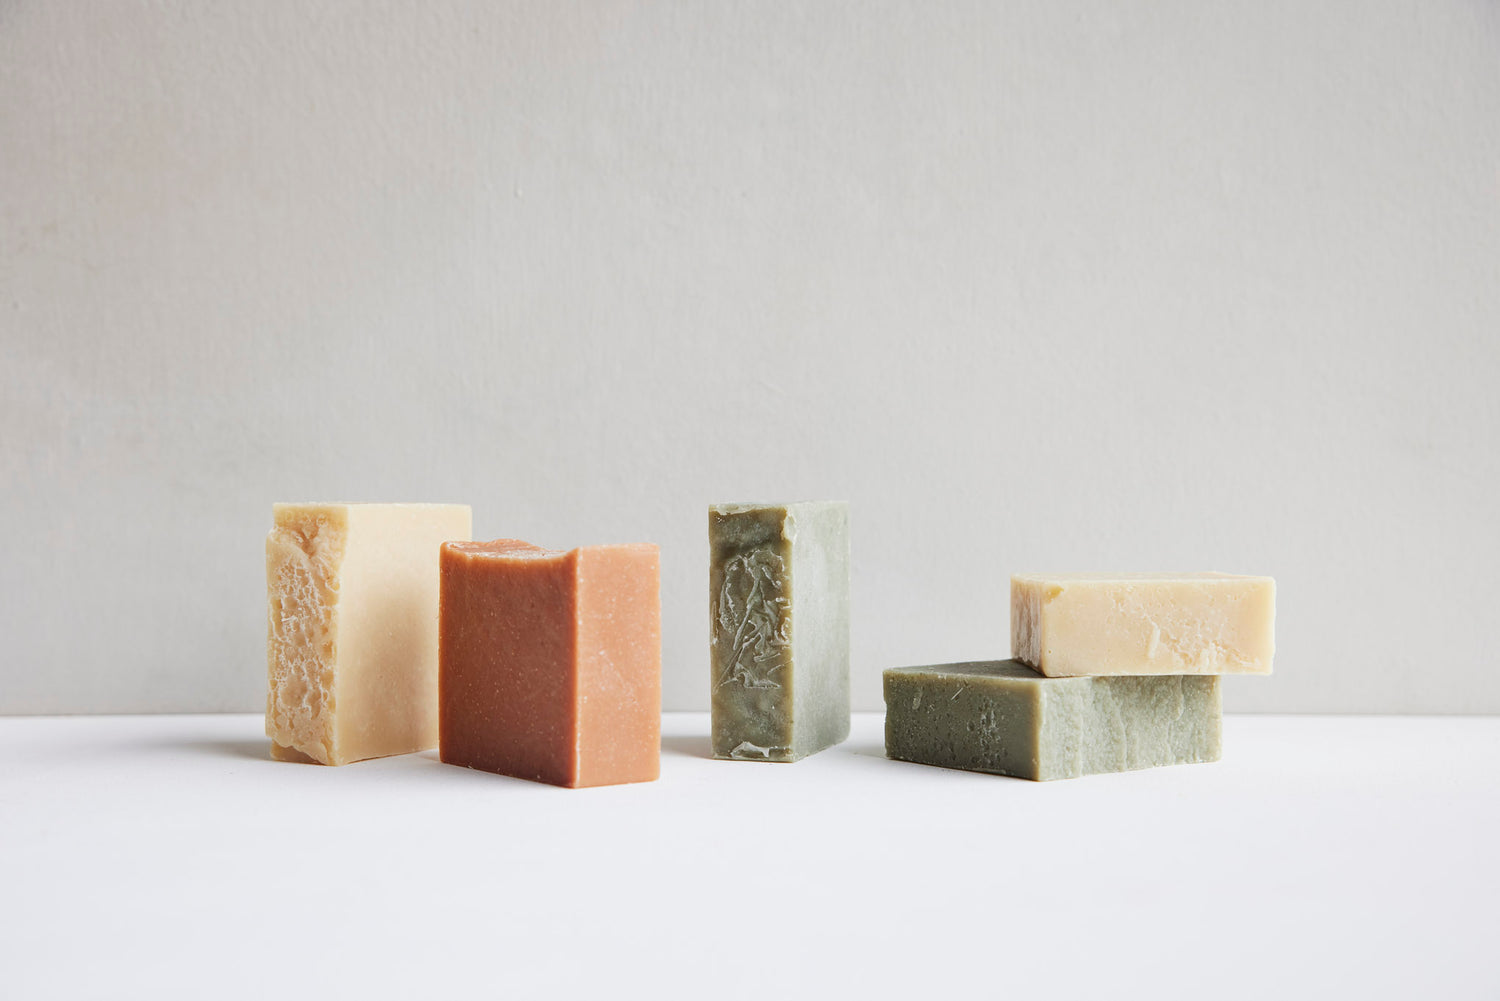 Soap Bars | Cleanser Bars | Natural Skincare | Nourished Daily